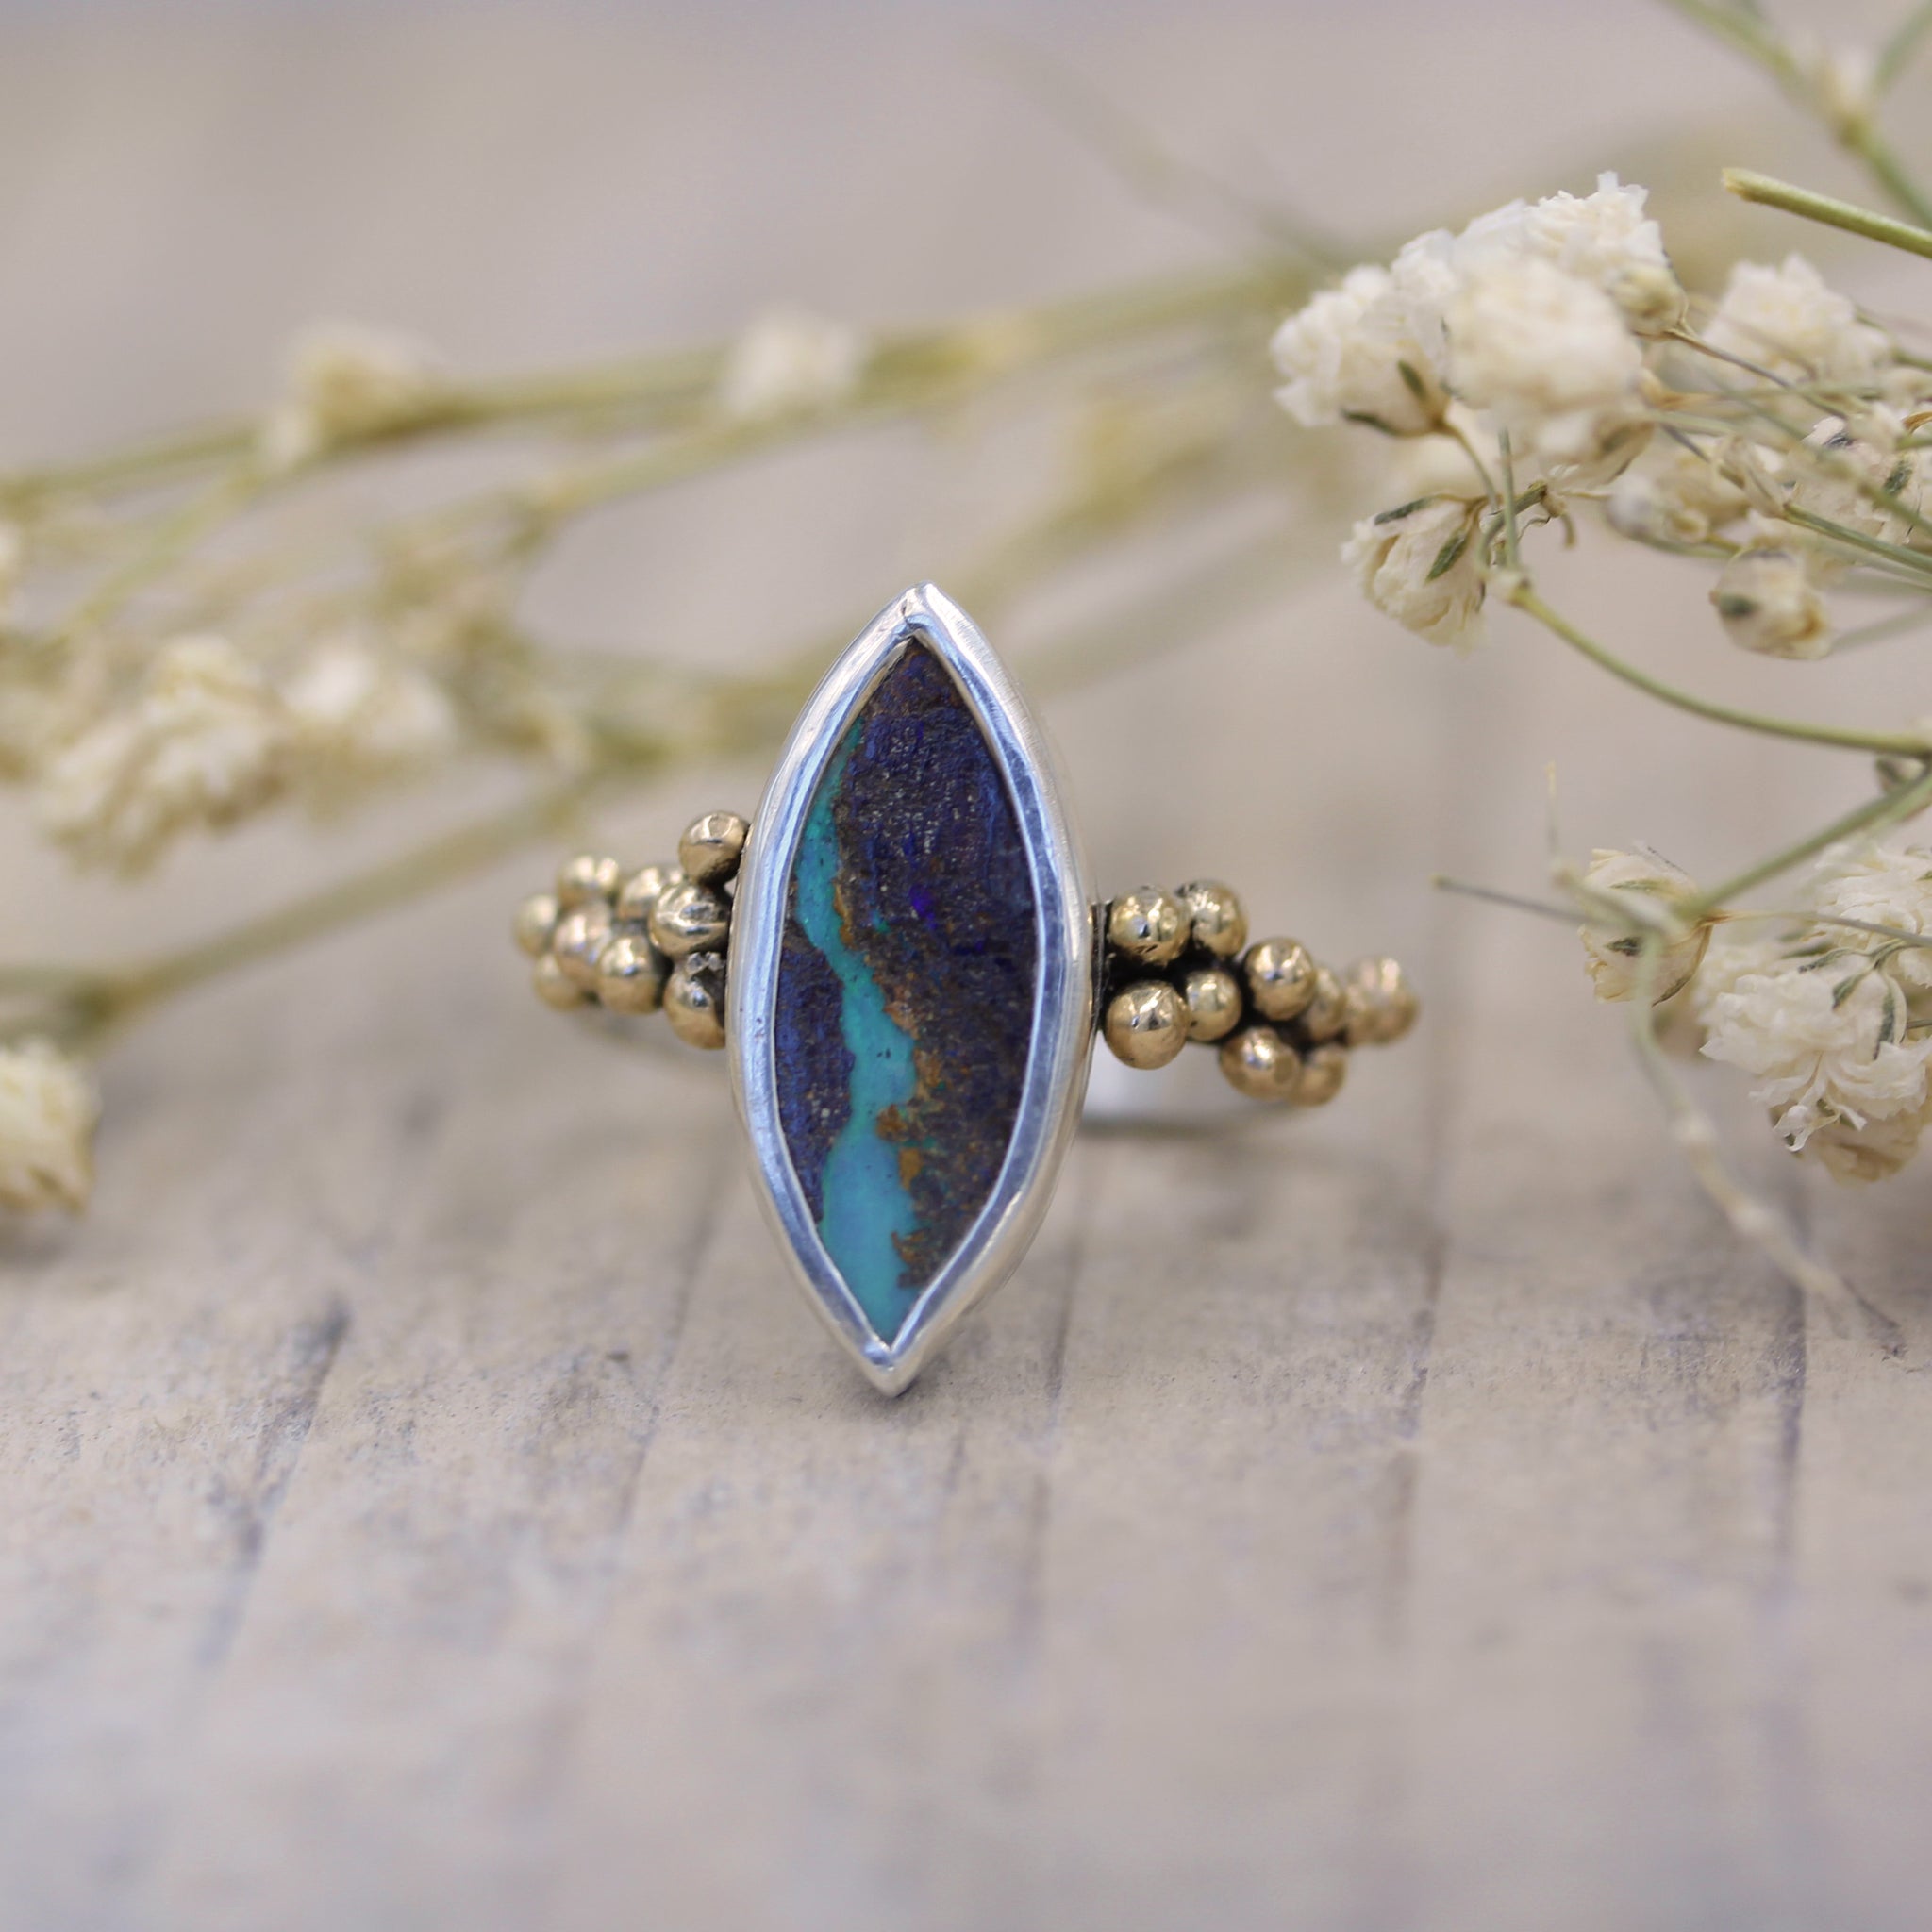 Australian Boulder Opal, silver and gold ring 